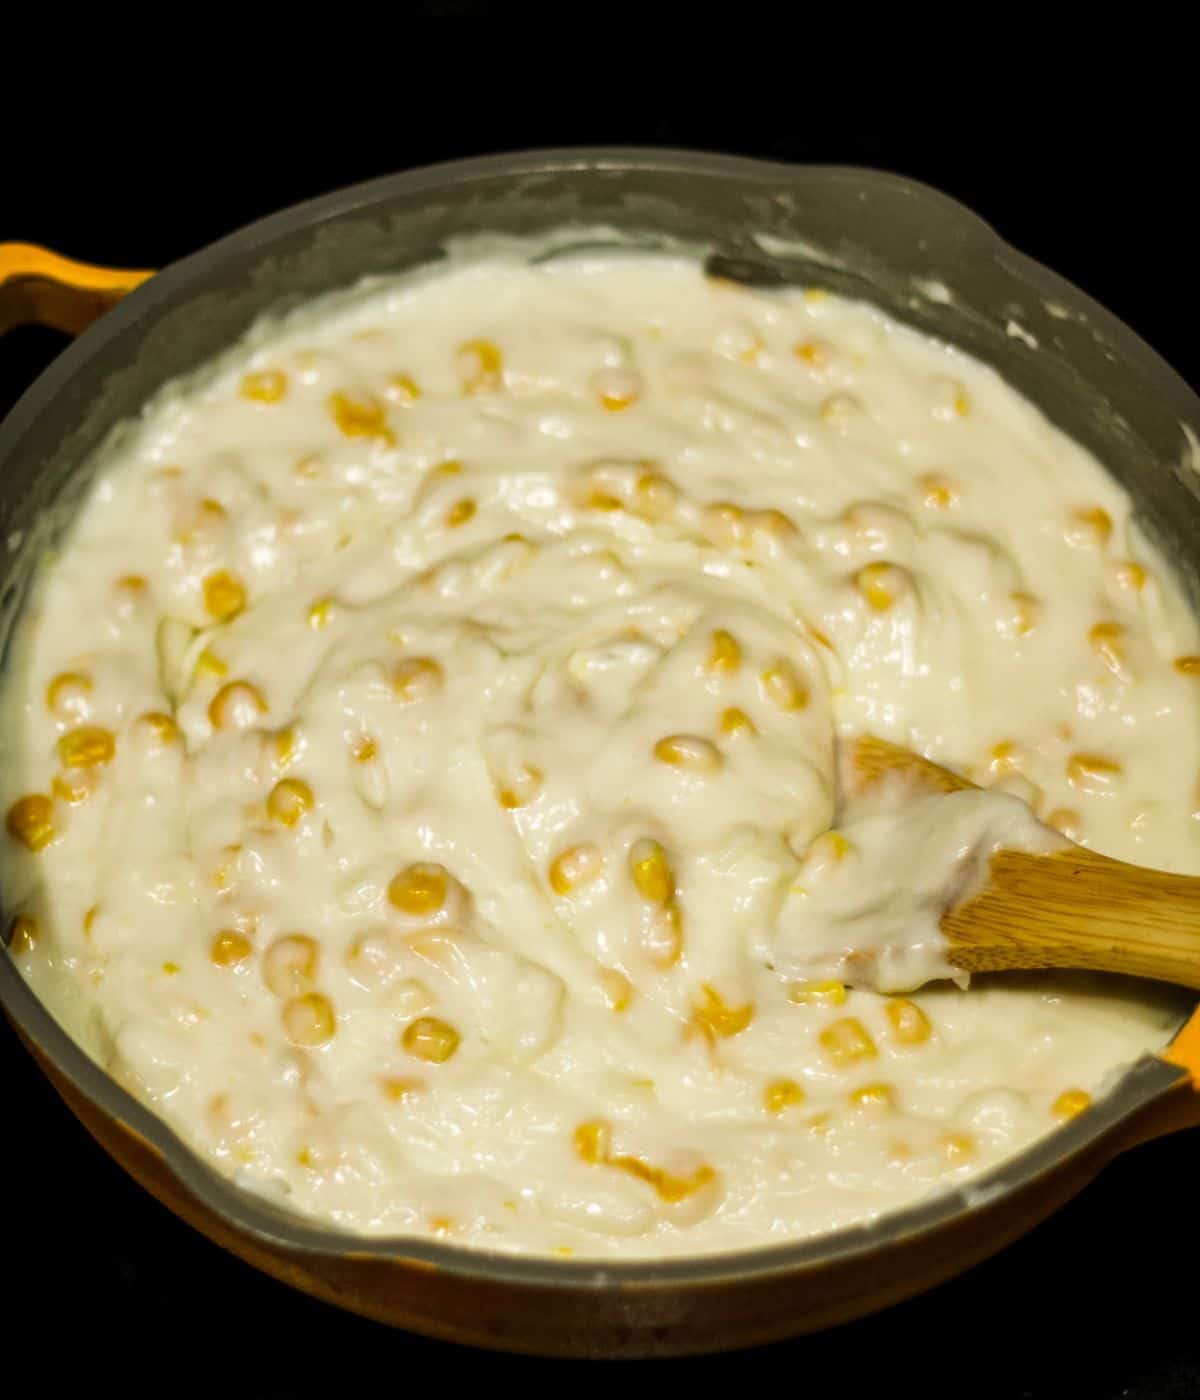 Thick maja blanca pudding in a skillet.